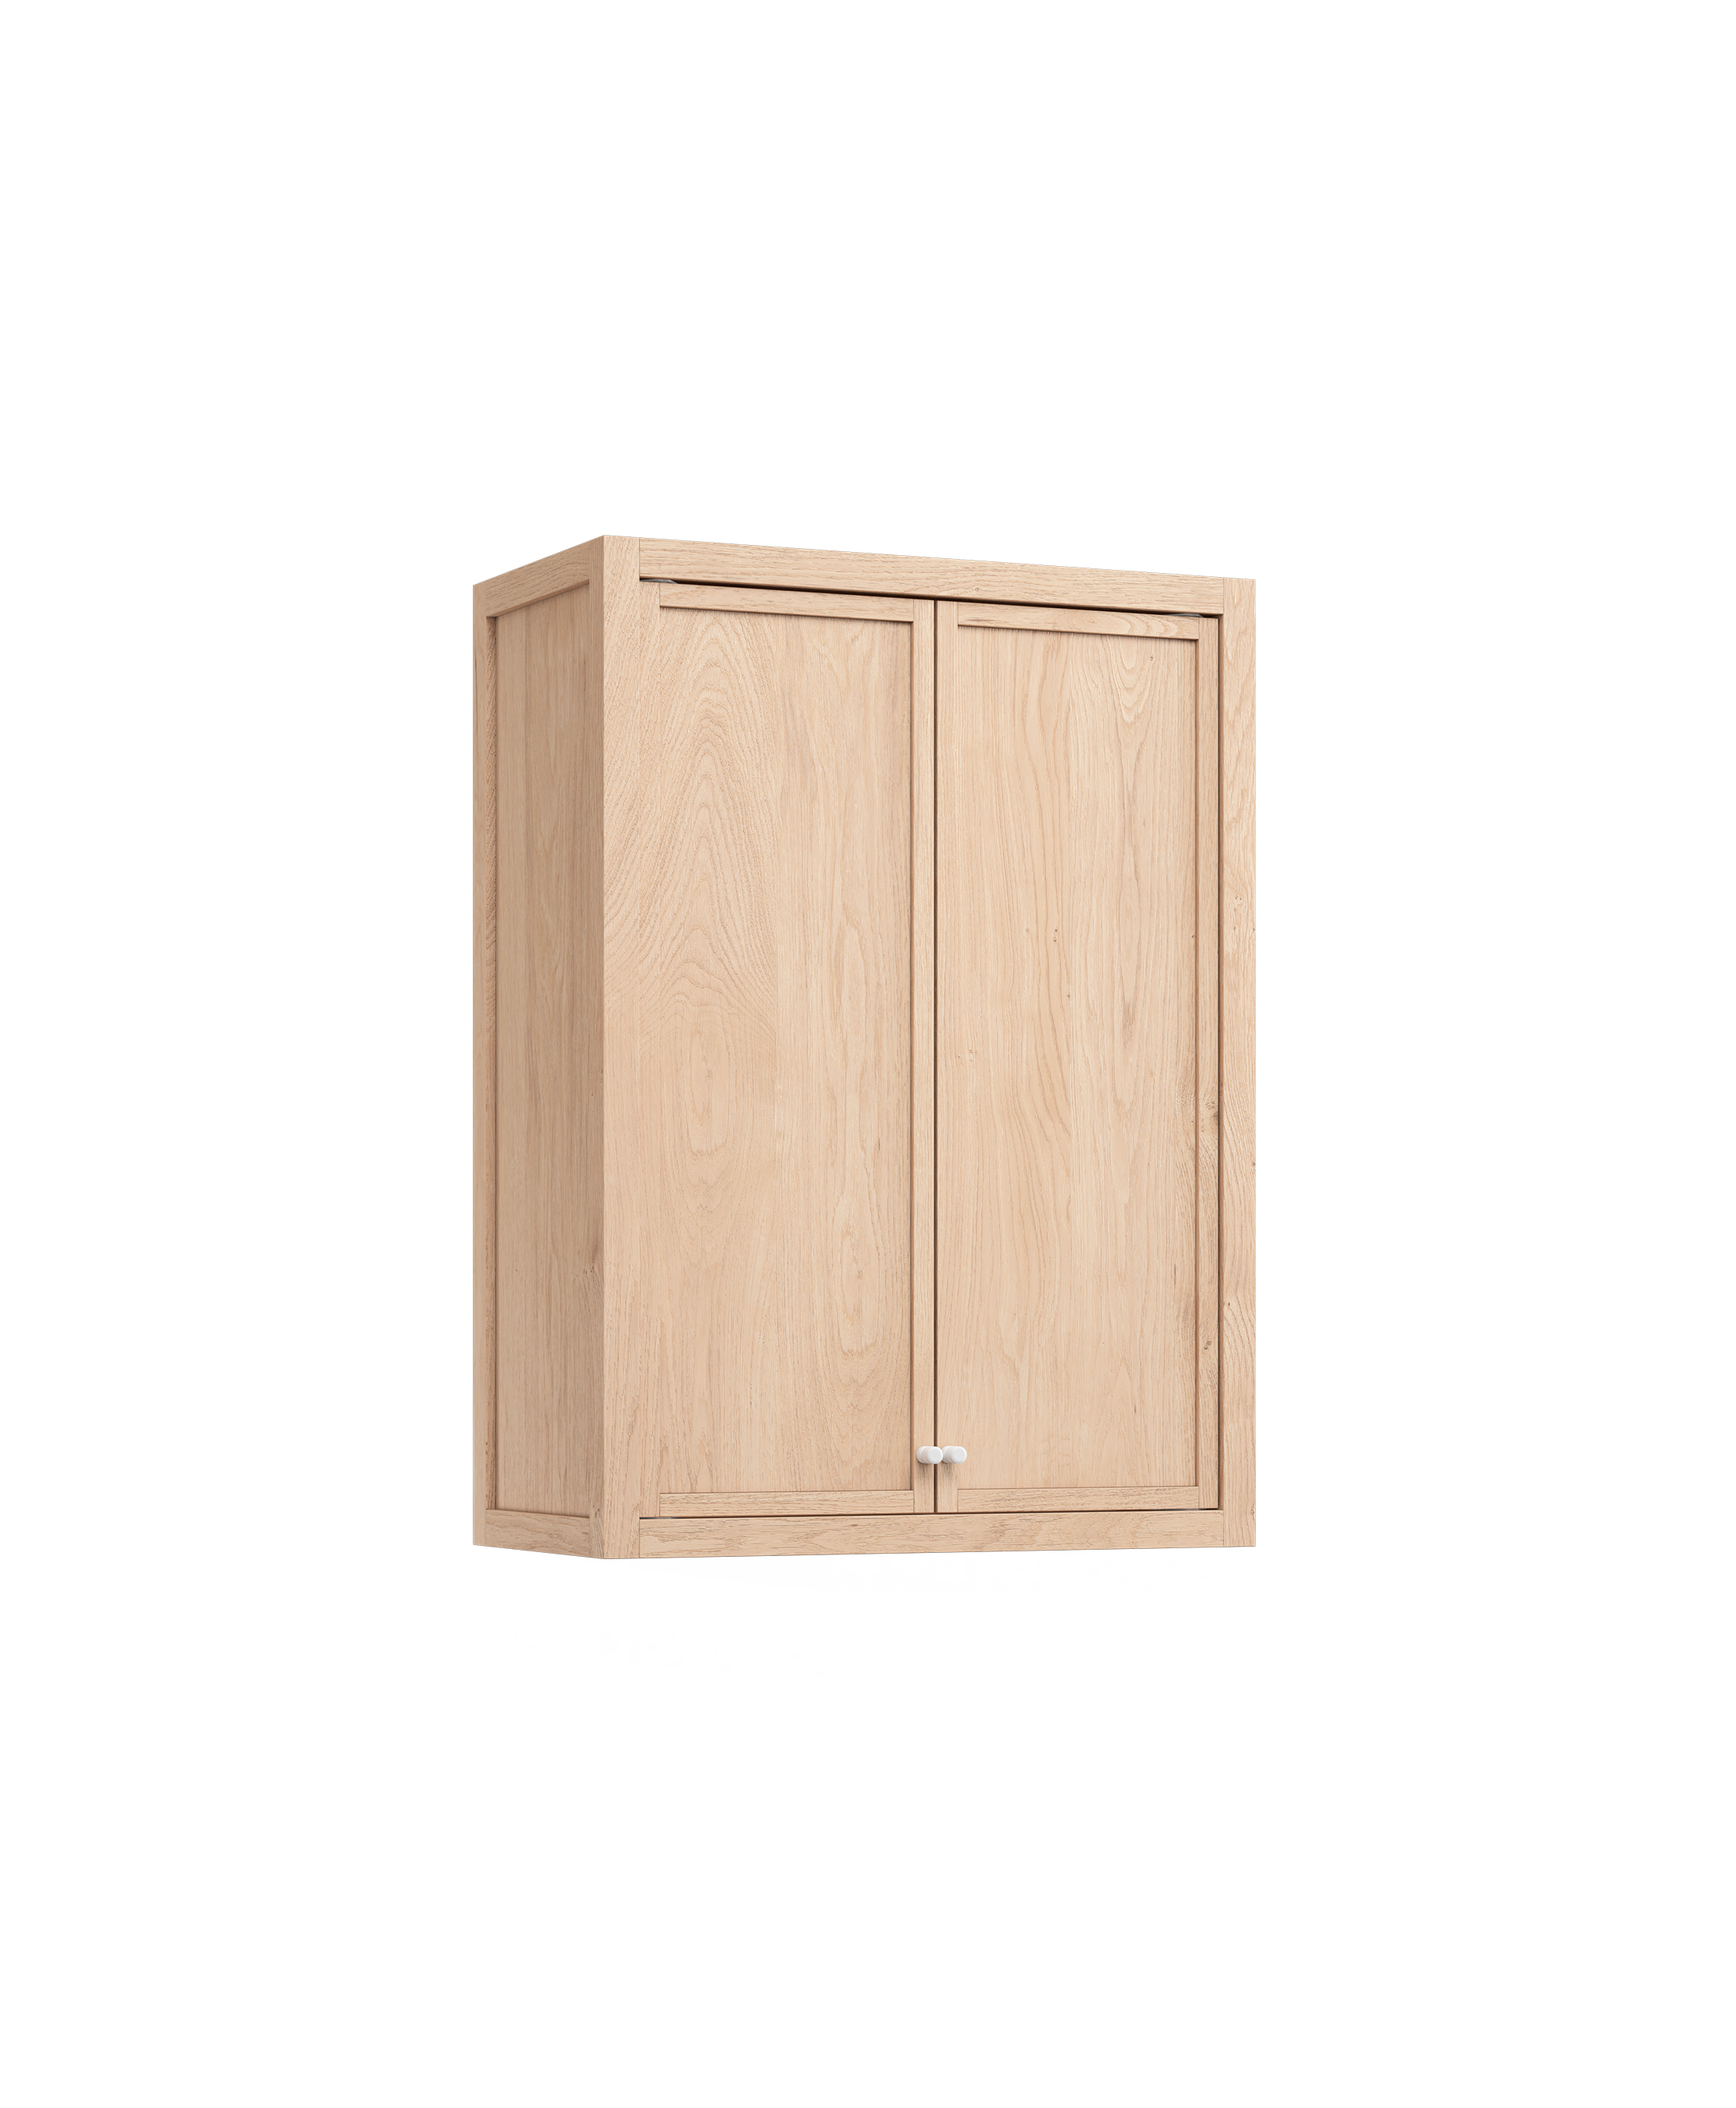 Coquo wall cabinet in natural oak, with shaker wood doors and white metal.  